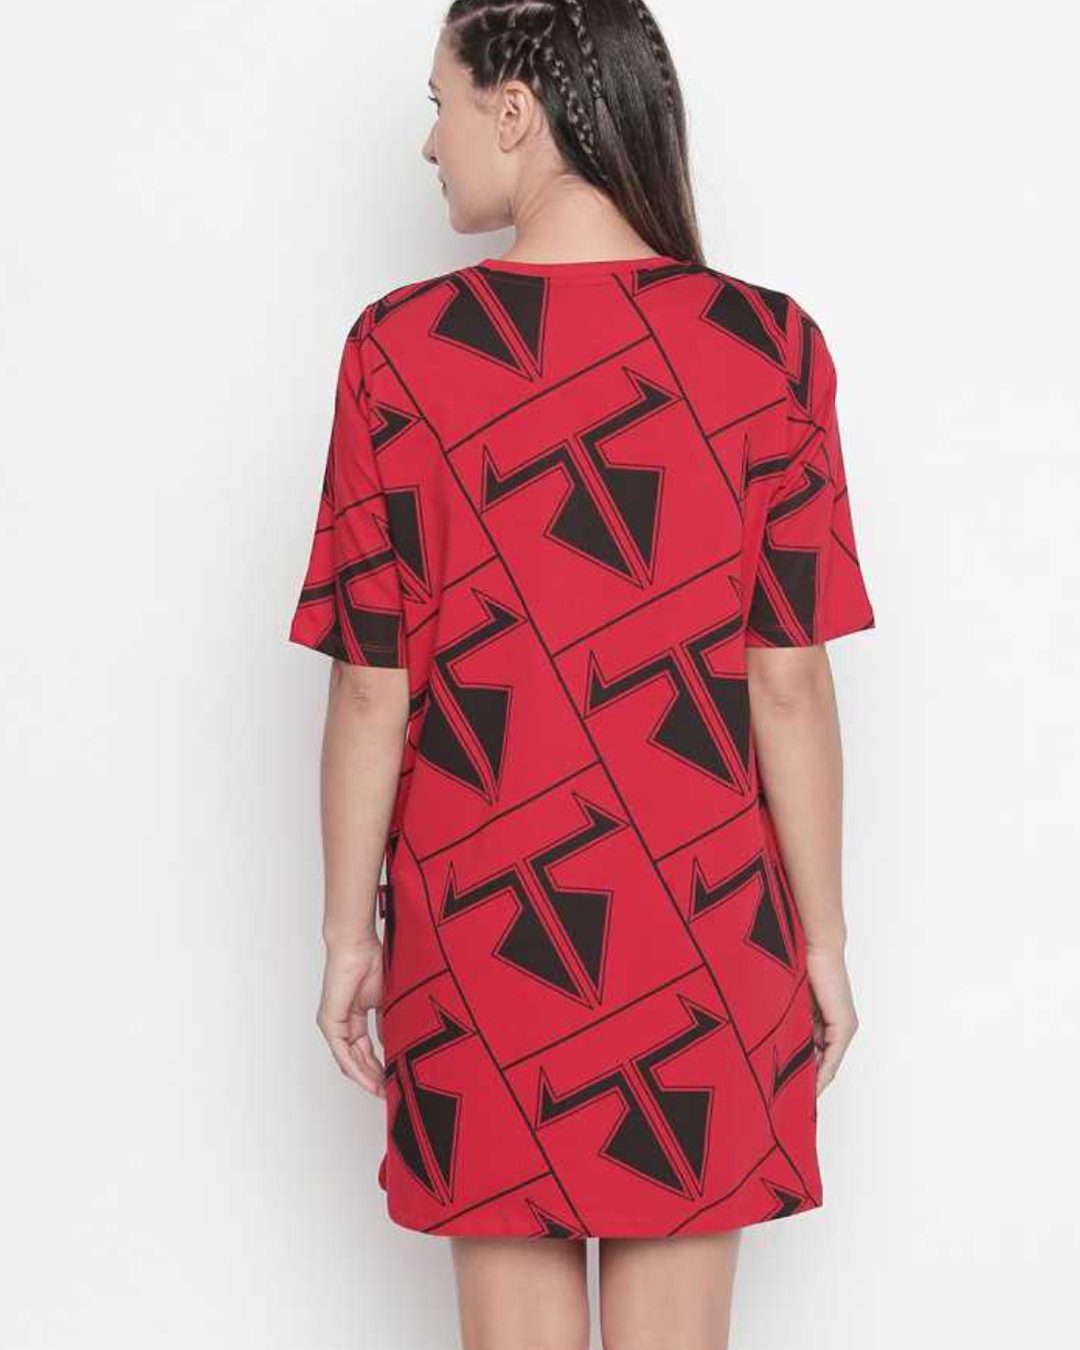 Shop Graphic Print Red Dress For Women-Back